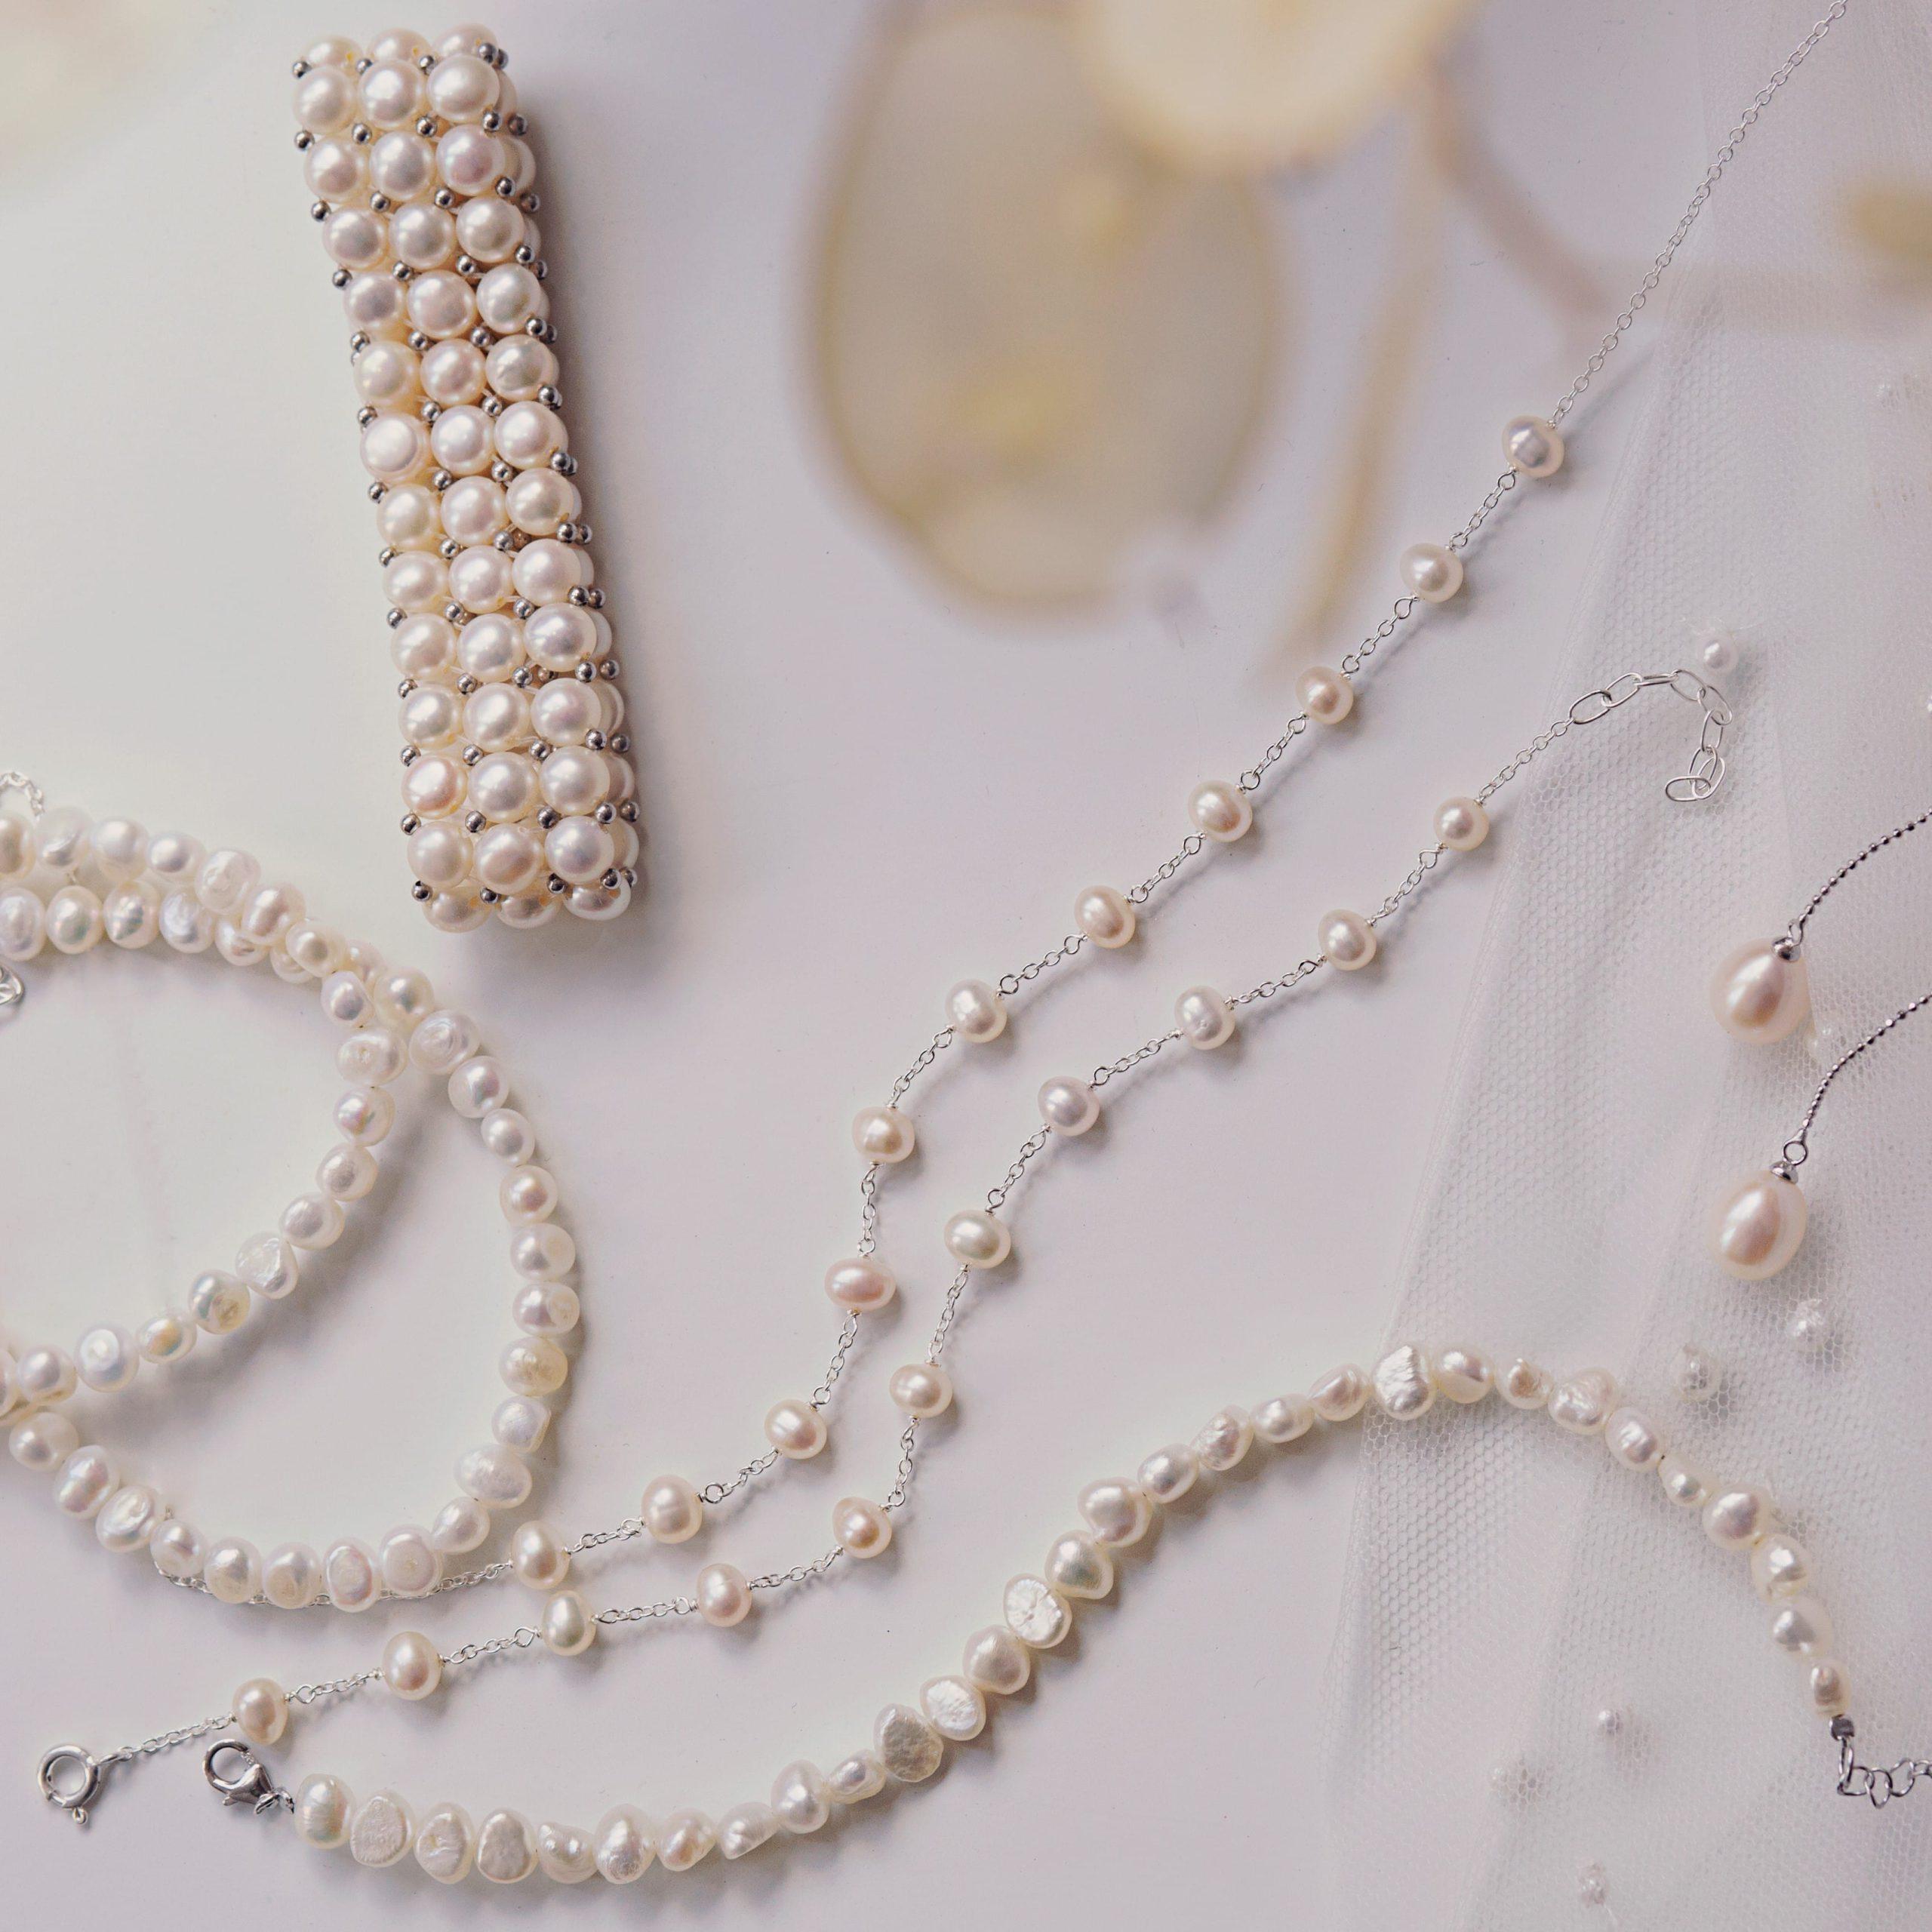 Costume Jewelry Pearls: History and how Chanel made them fashionable